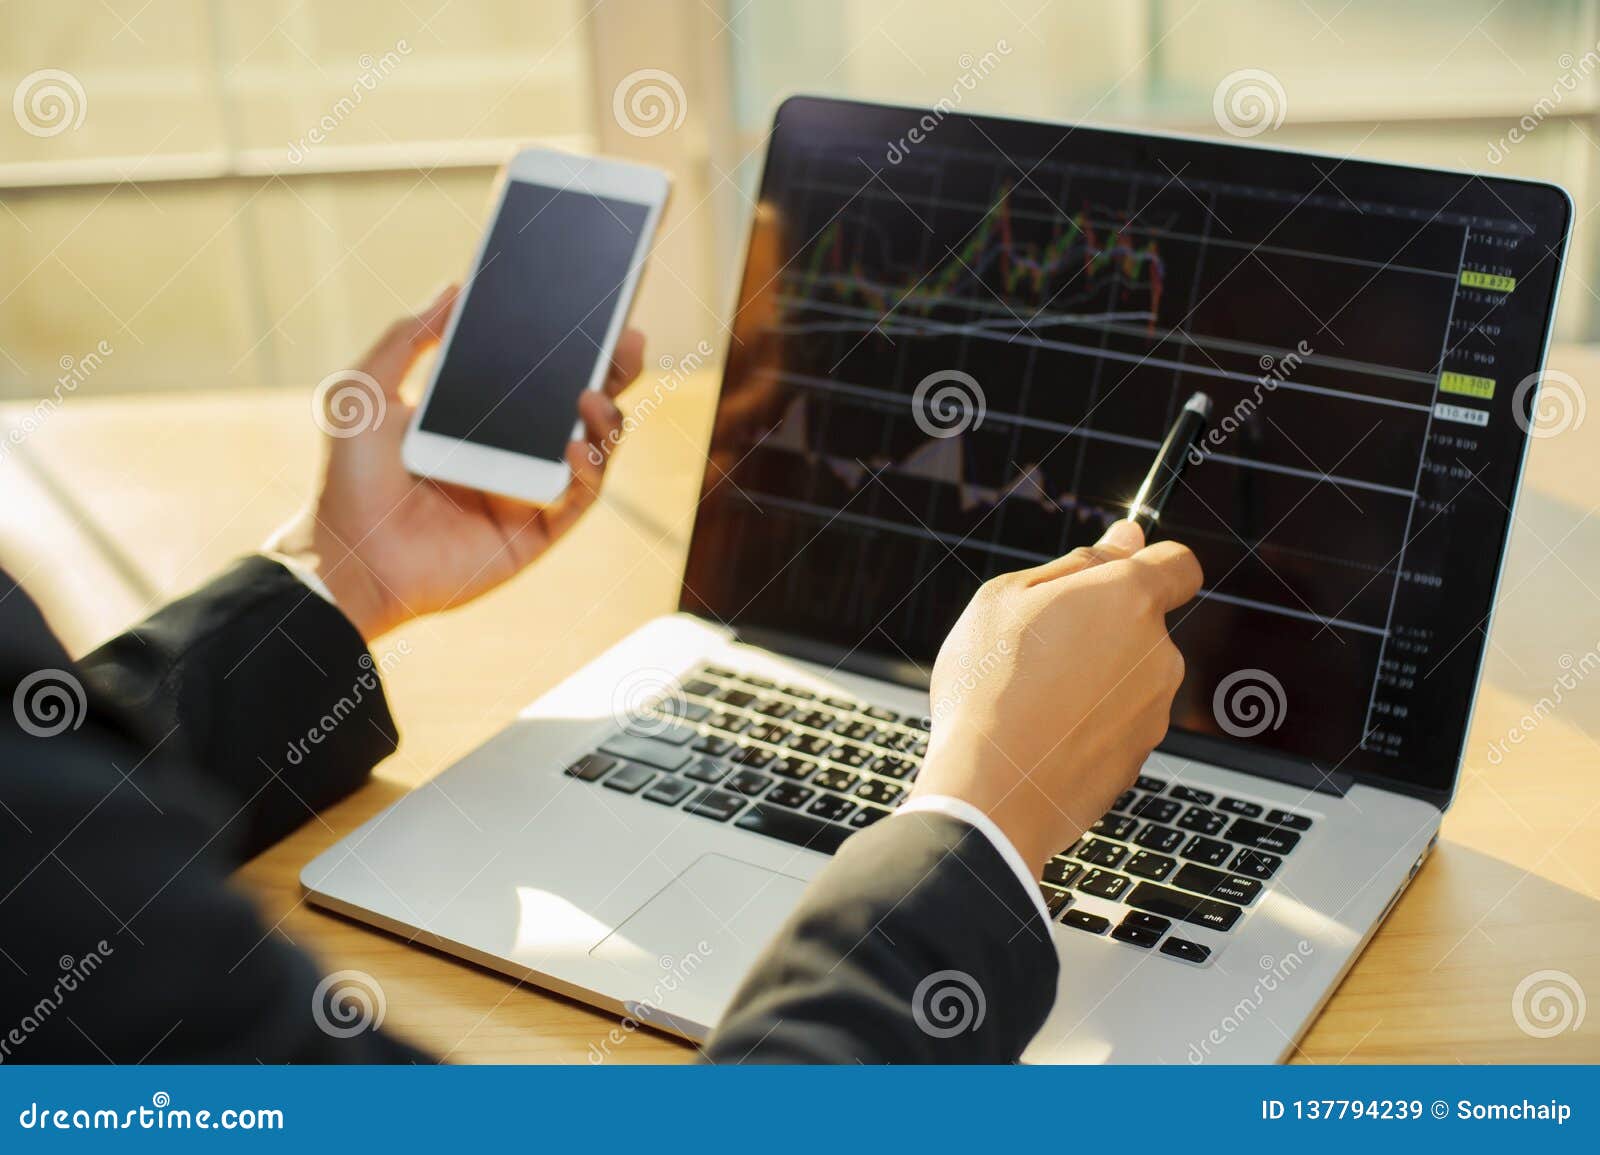 Stock Forex Trader Working in Office Time Stock Image - Image of business,  businessman: 137794239